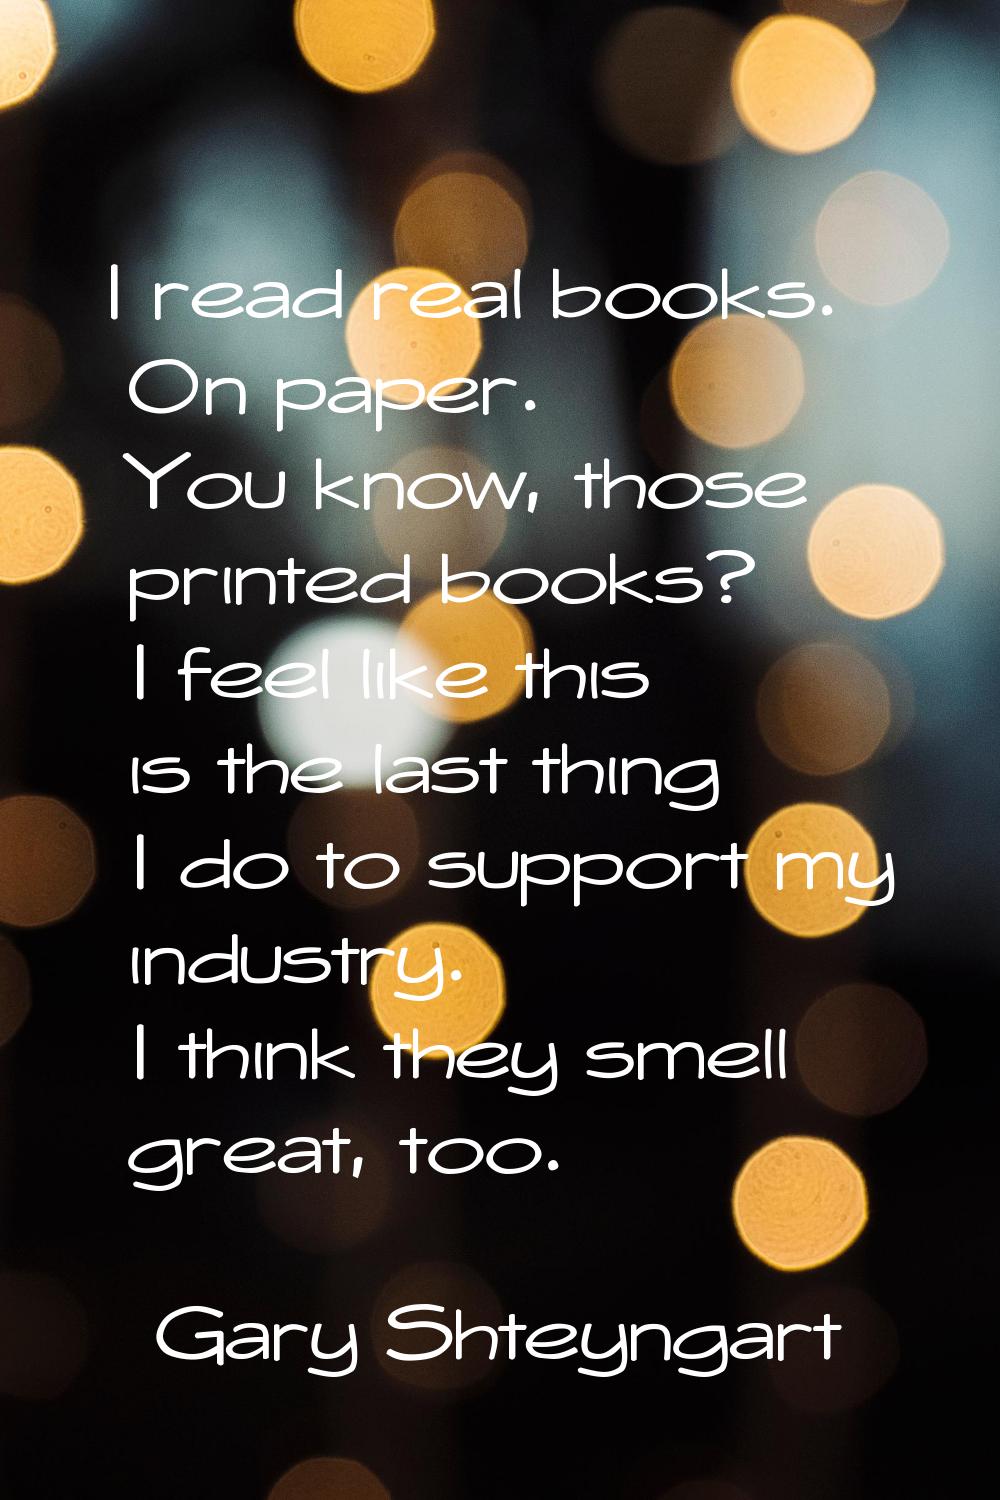 I read real books. On paper. You know, those printed books? I feel like this is the last thing I do